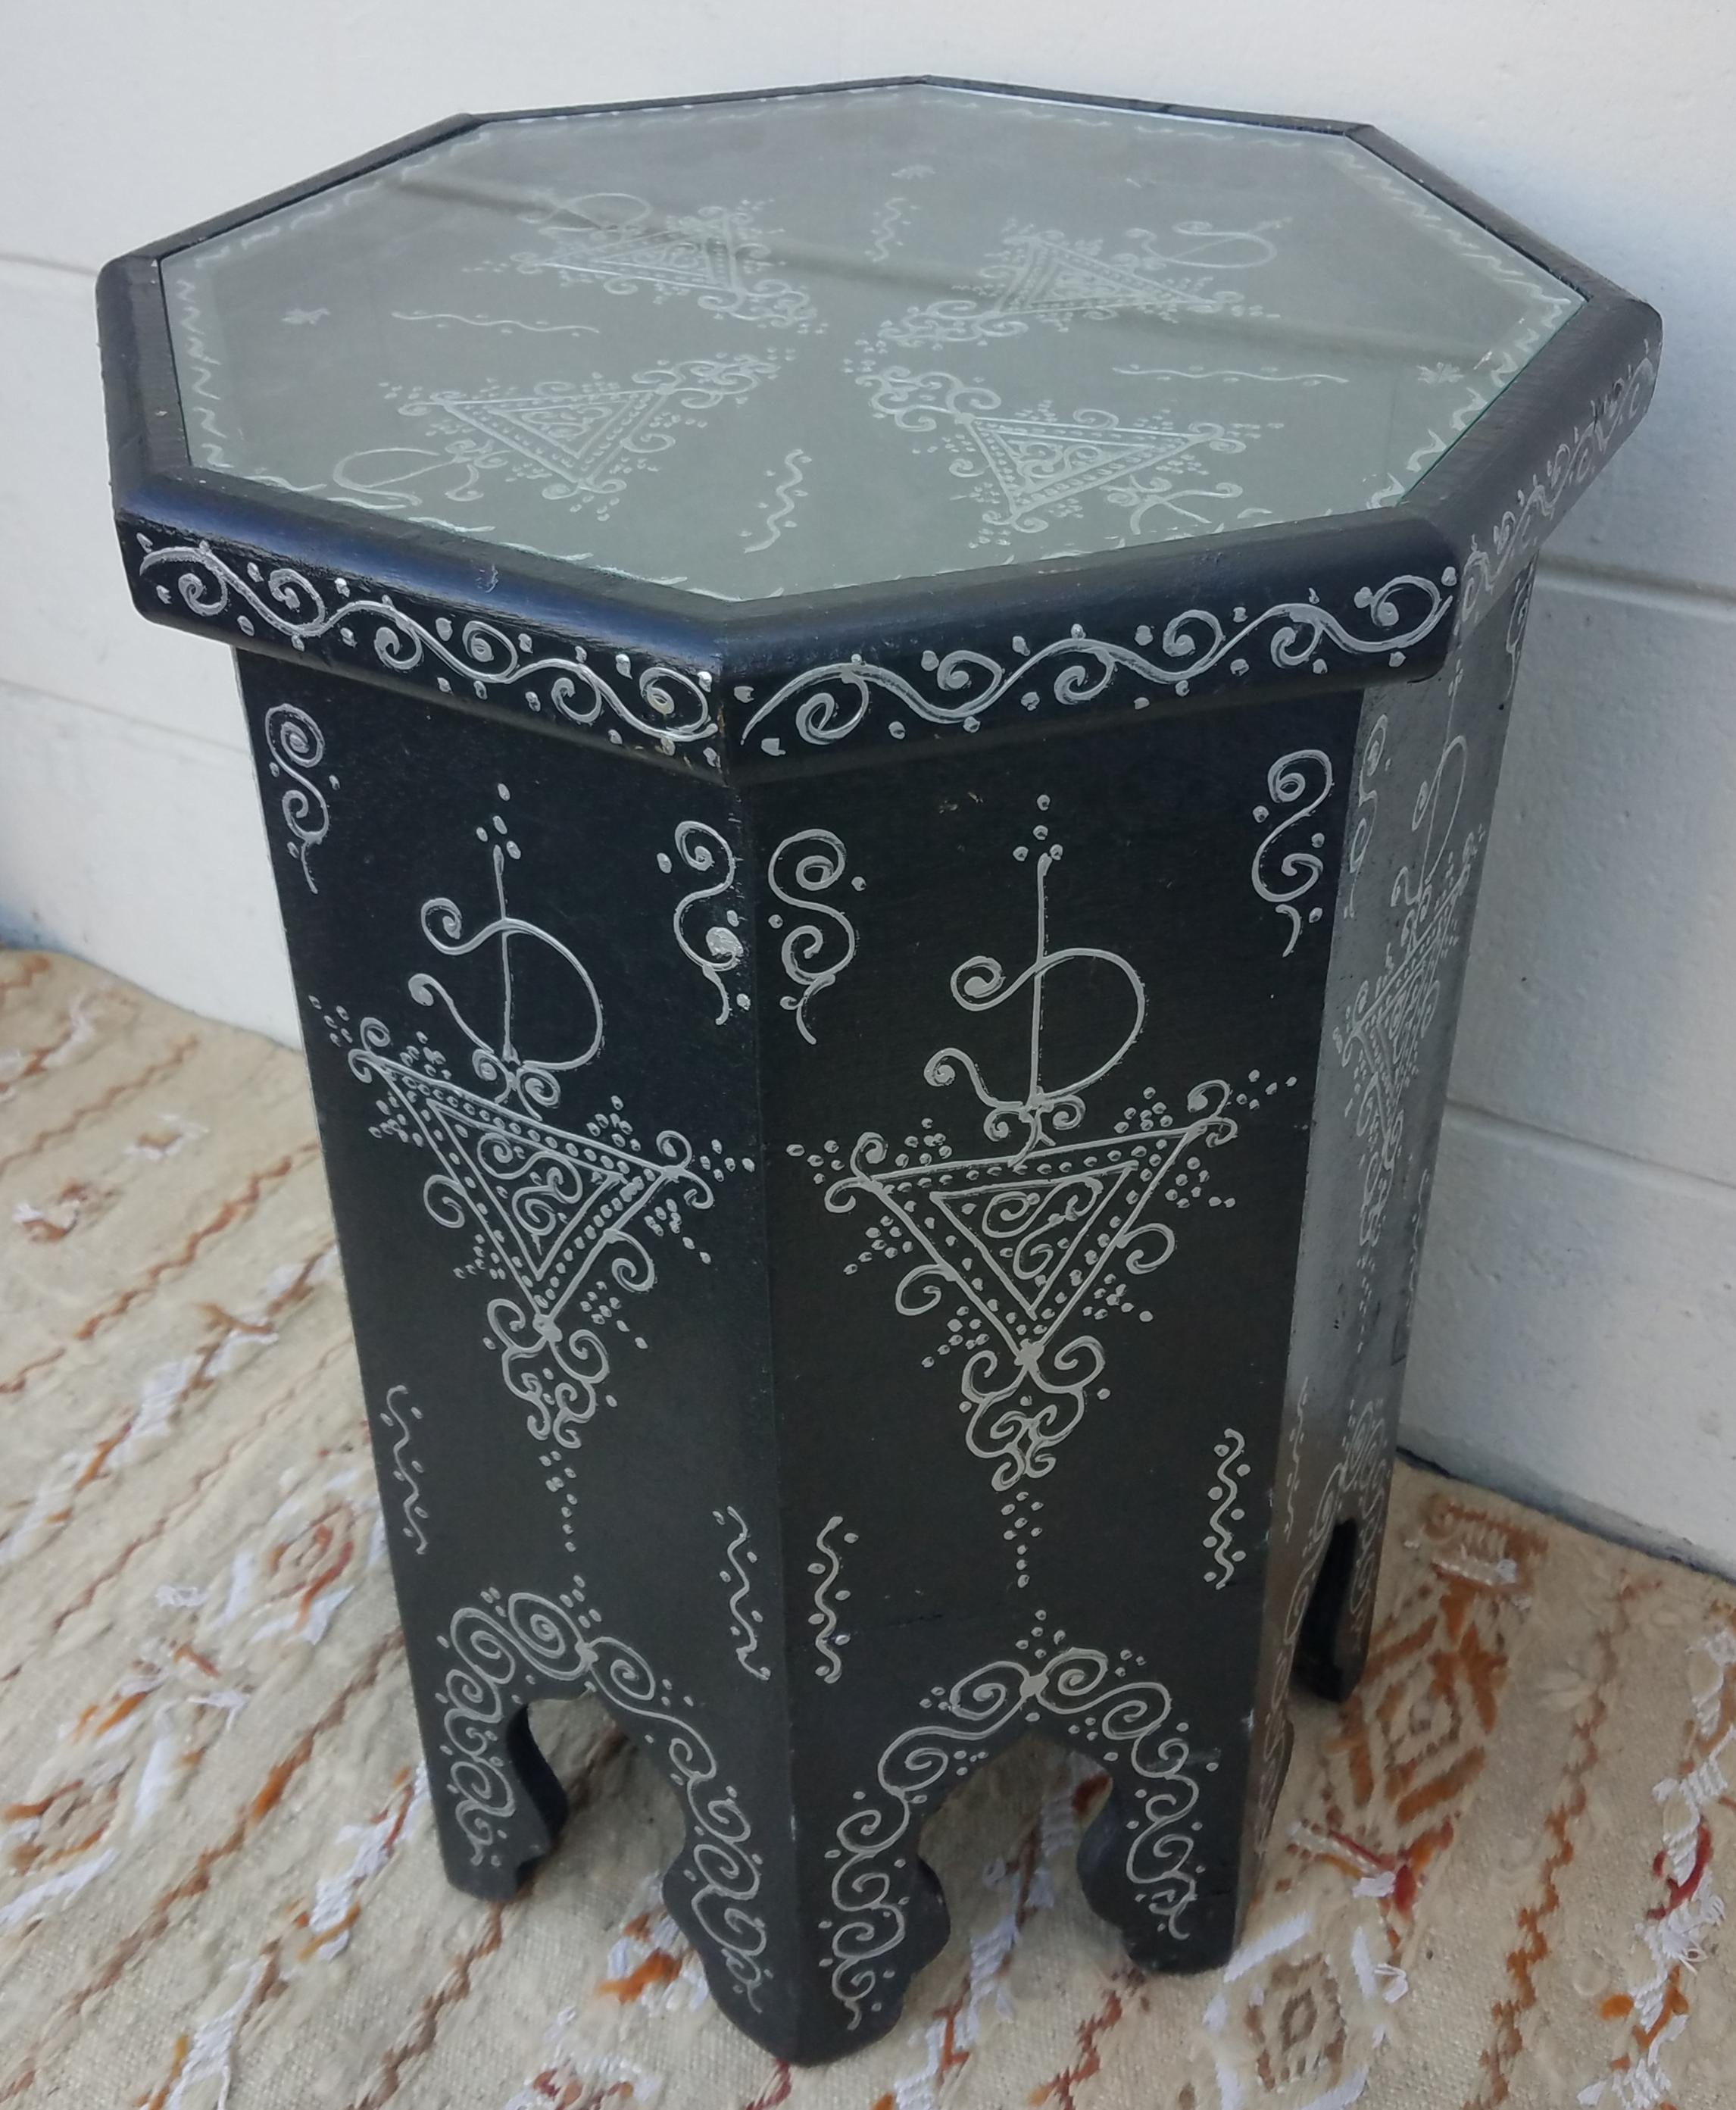 Rare find! 100% hand painted Moroccan hexagonal shape side table. Black base with silver color design patterns. Great handcraftsmanship throughout. Beautiful add-on to your decor. This table measures approximately 20